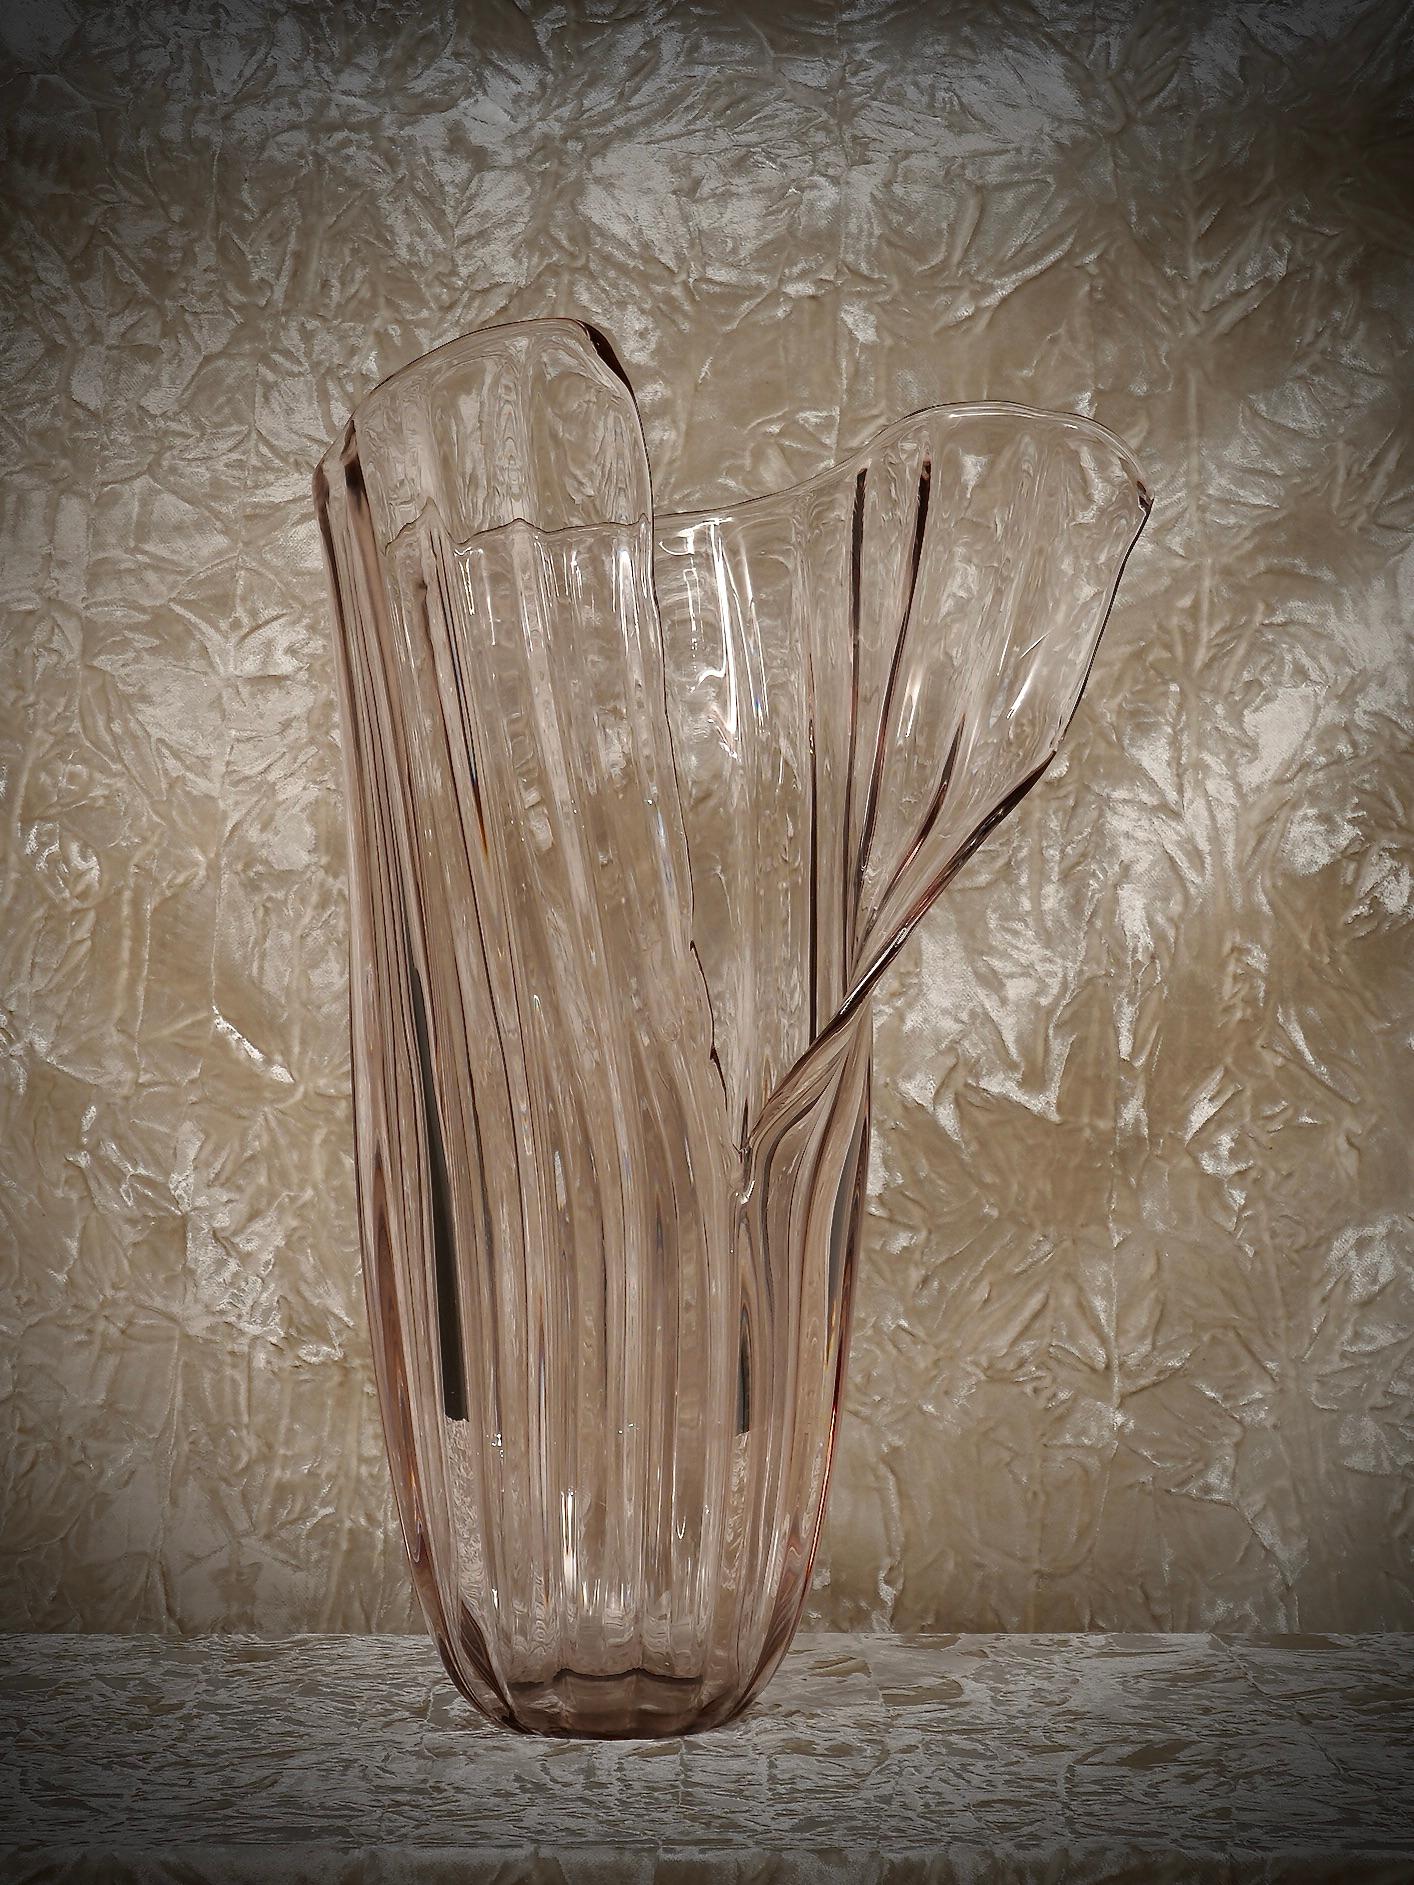 Beautiful vase from the Murano manufacture, particular design open at the front. Light, thin and delicate, it looks like a butterfly has landed on it.

The vase is large in size, and has vertical ribs. The narrow, thick base in the glass contrasts